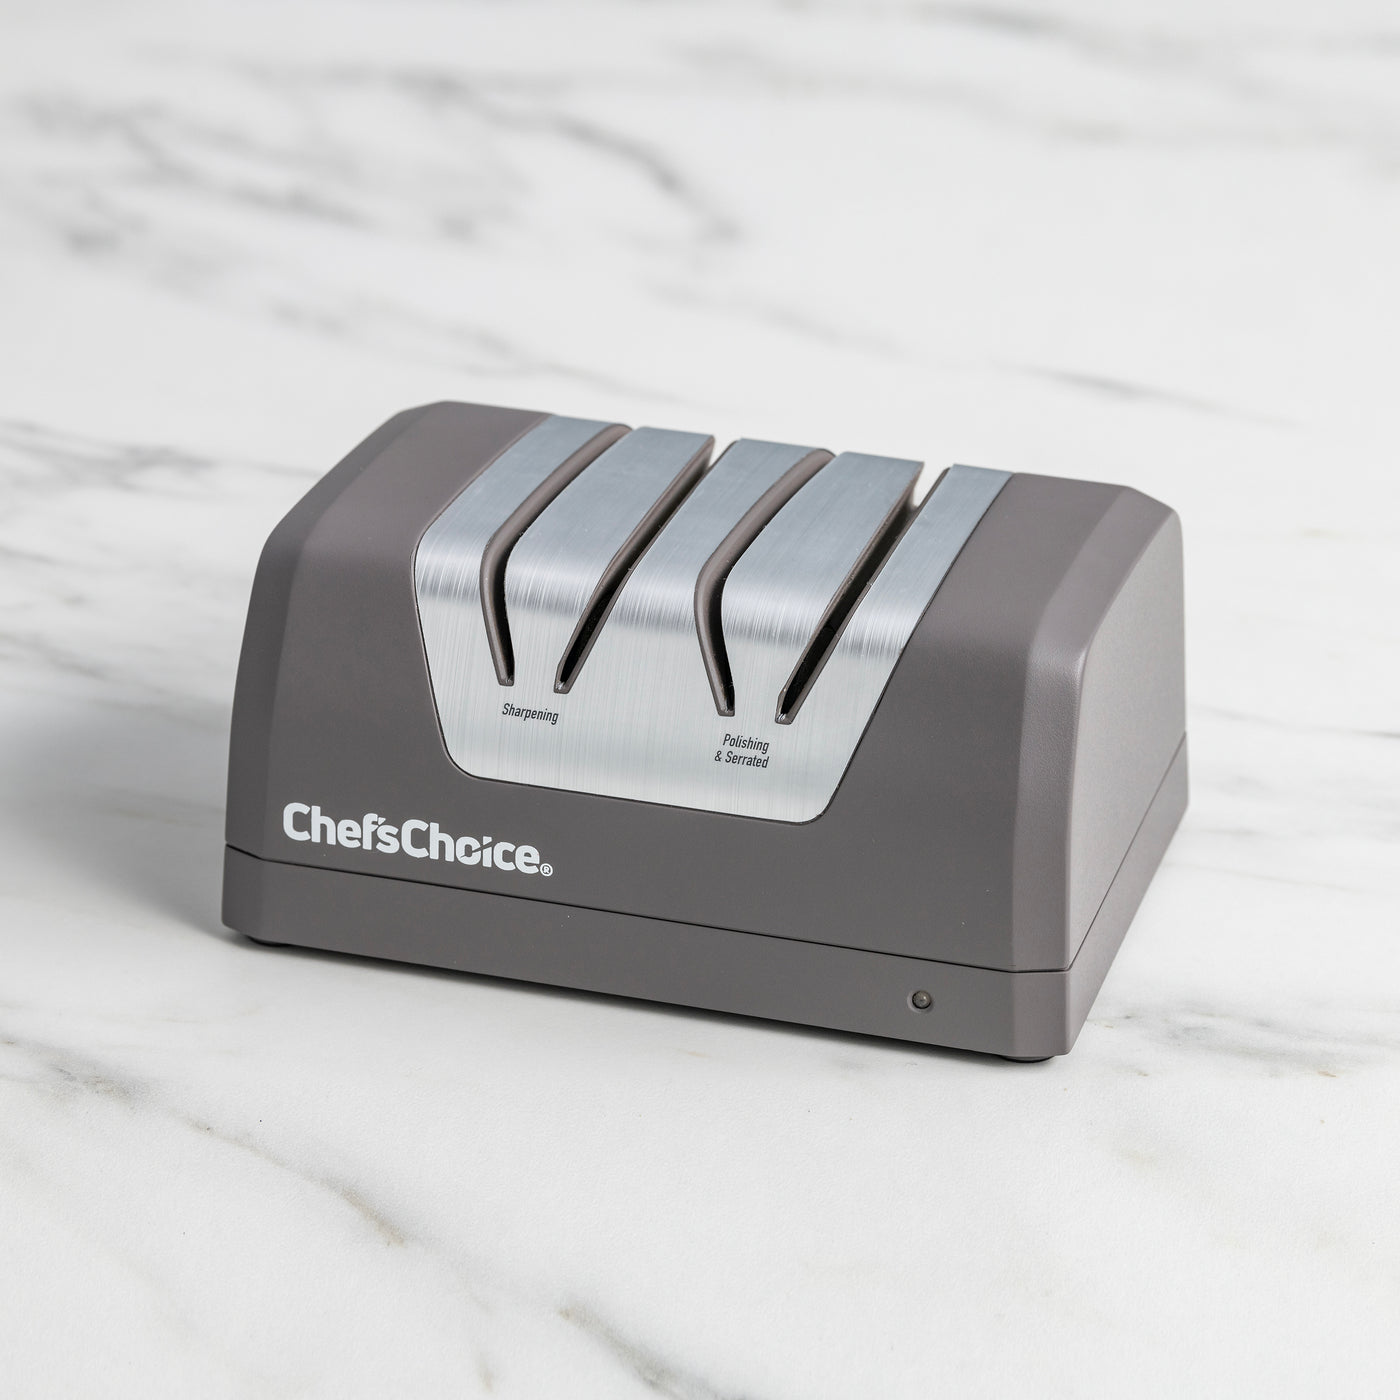 ChefsChoice Model 323 Commercial Electric Knife Sharpener, 2-Stage  20-Degree Dizor, in Gray (0323000)